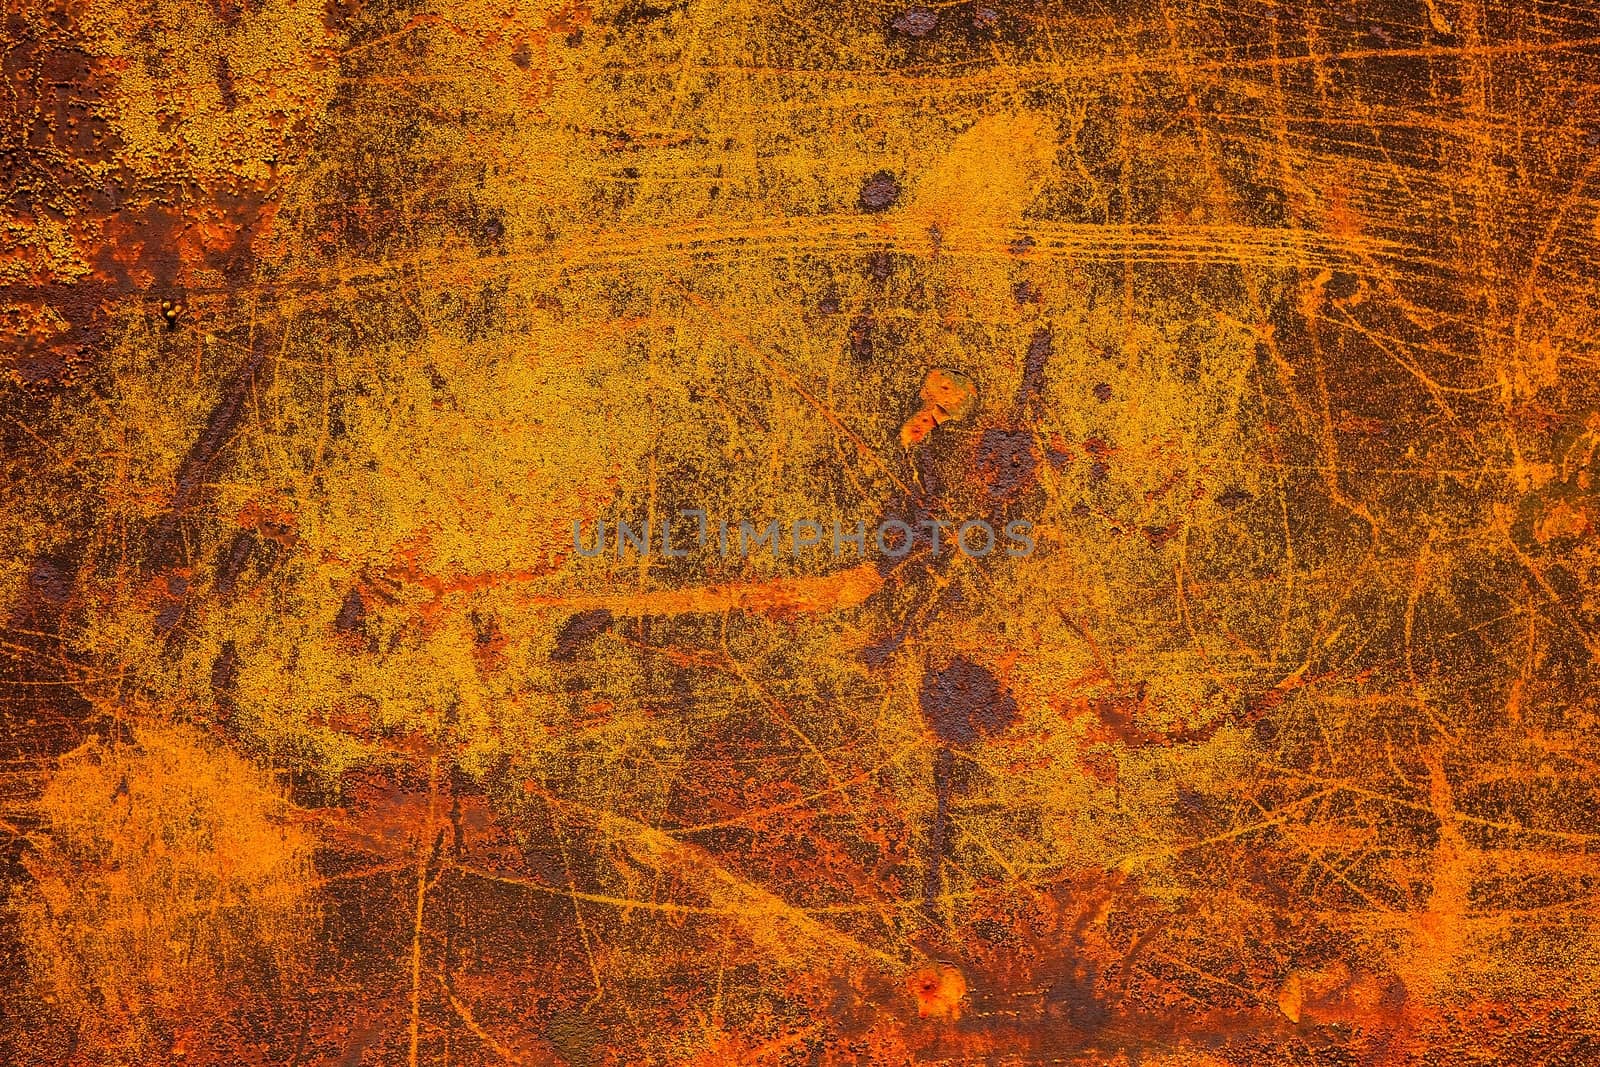 Red Rusty Texture Wall Background.